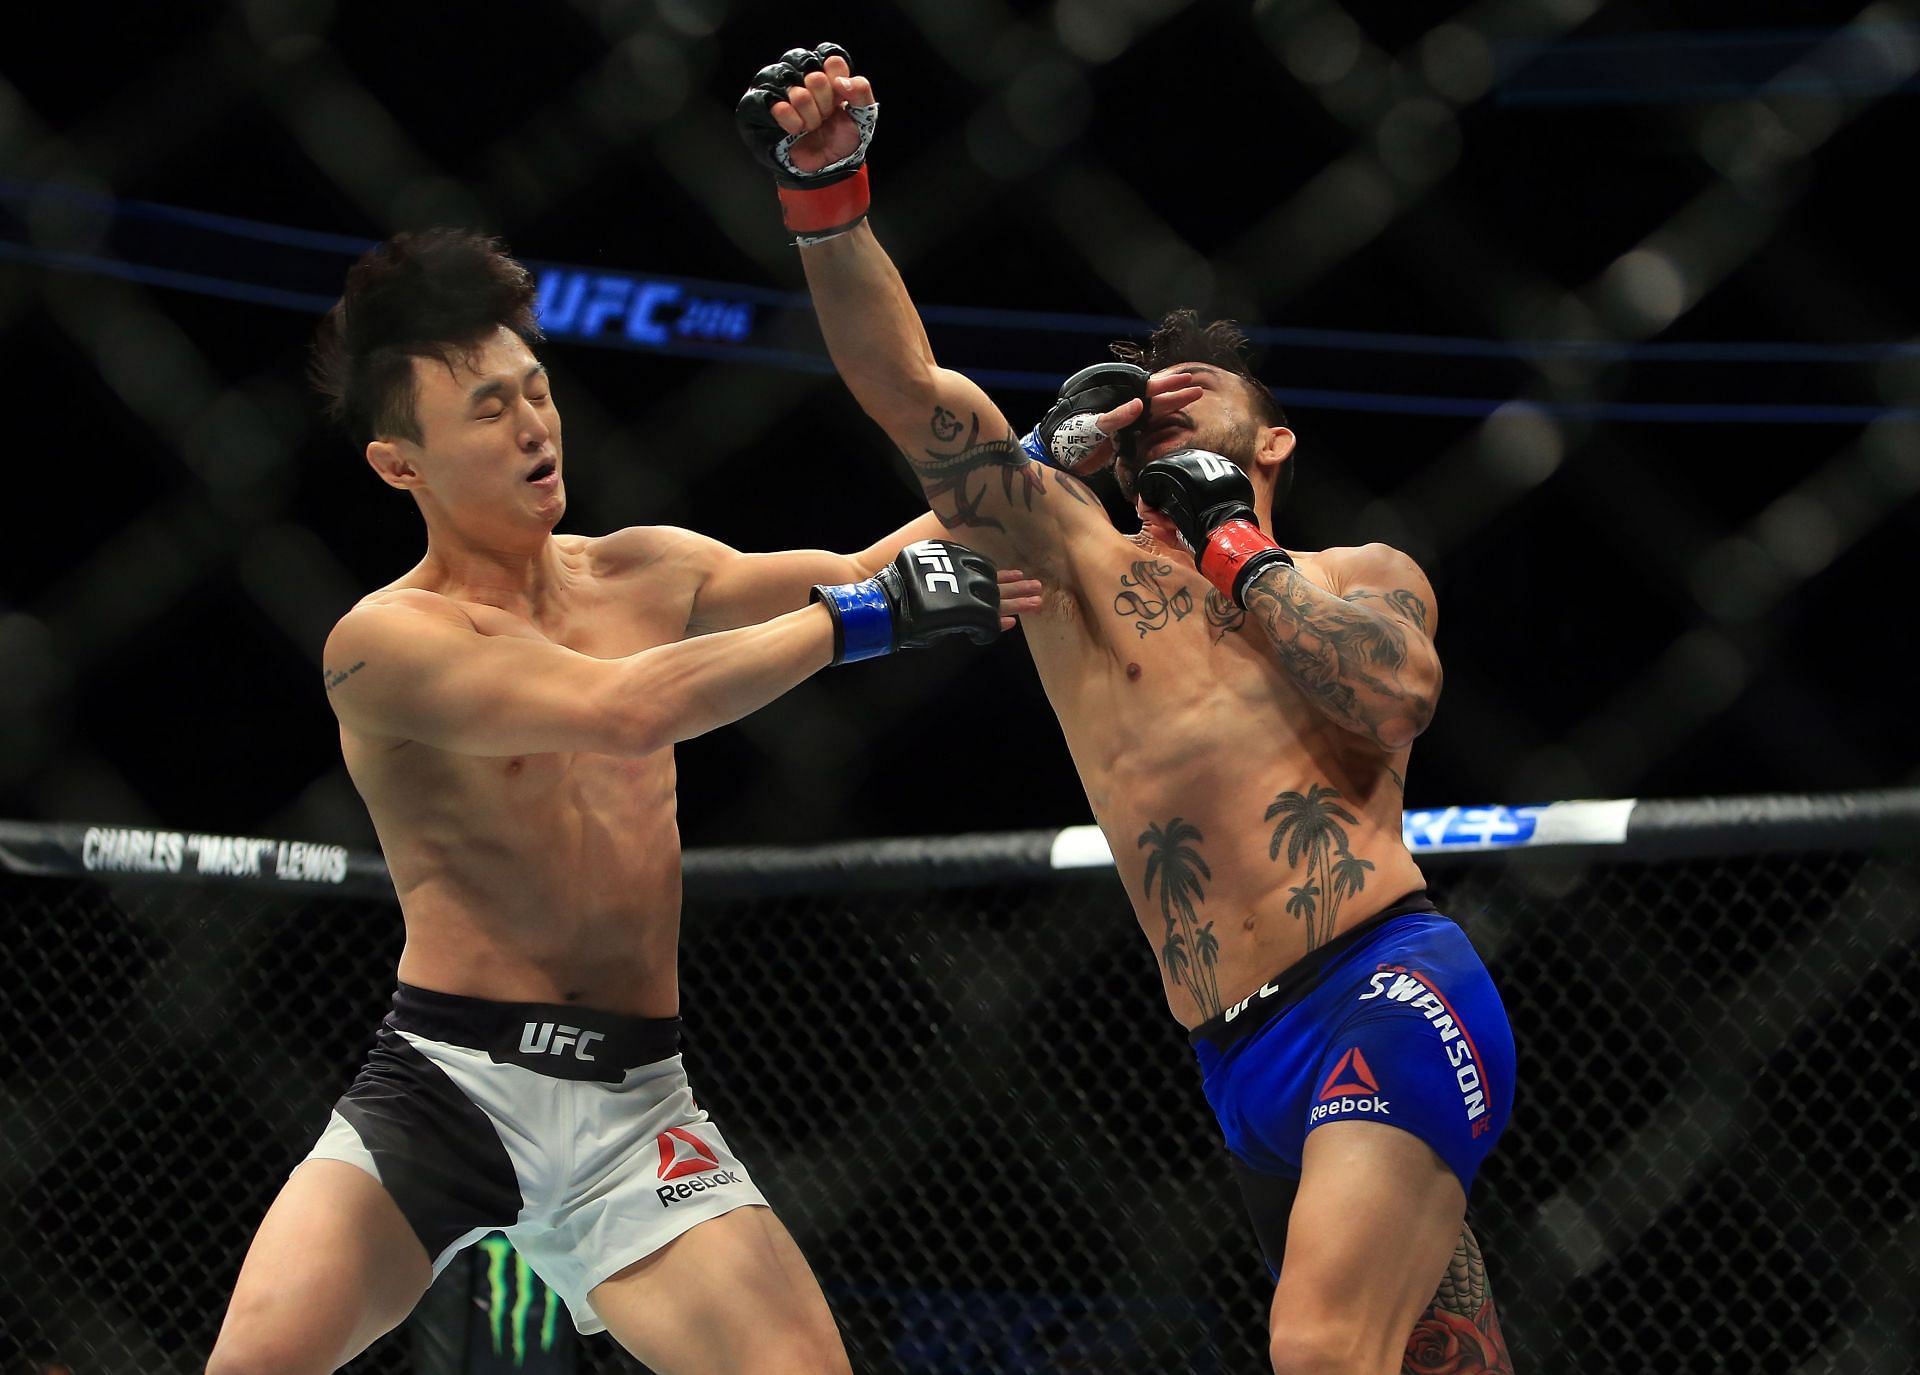 Doo Ho Choi rose to fame after his wild brawl with Cub Swanson in 2016